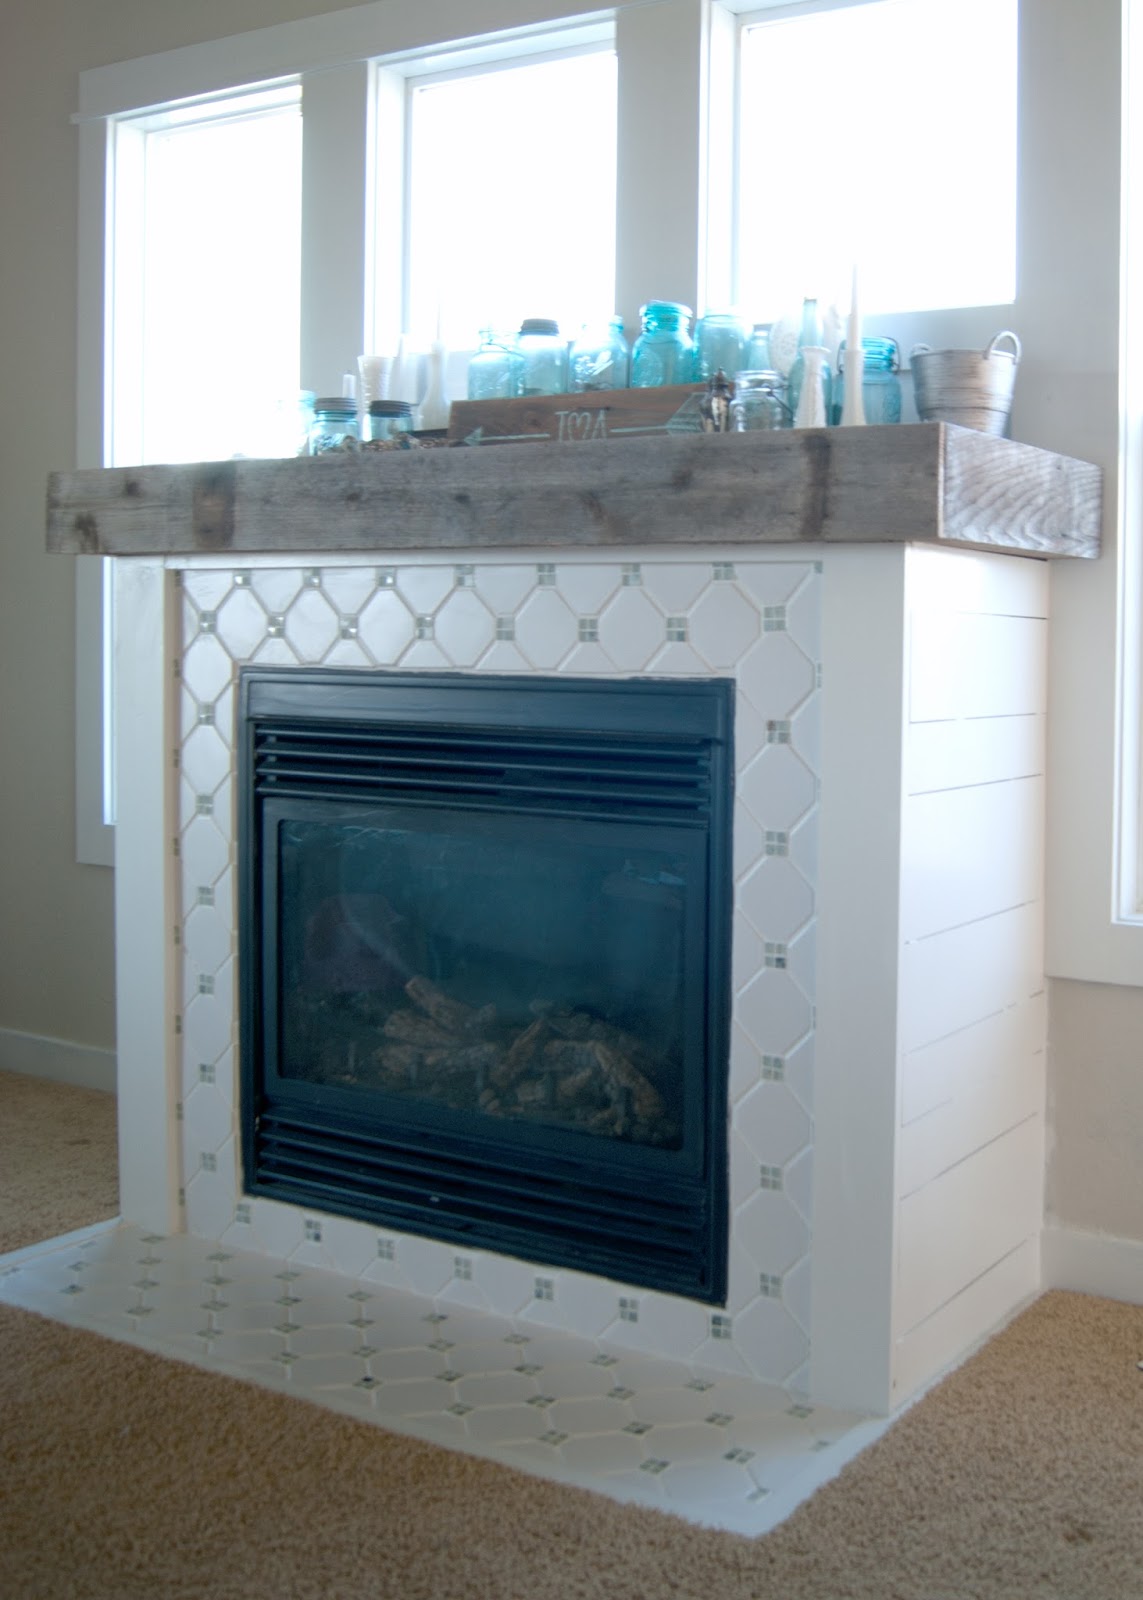 Fireplace Makeover - DIY Fireplace makeover using reclaimed and salvaged materials - octagon & dot tile, reclaimed wood,  white paint, planking - all for under $60! Before and After and links to all the steps!